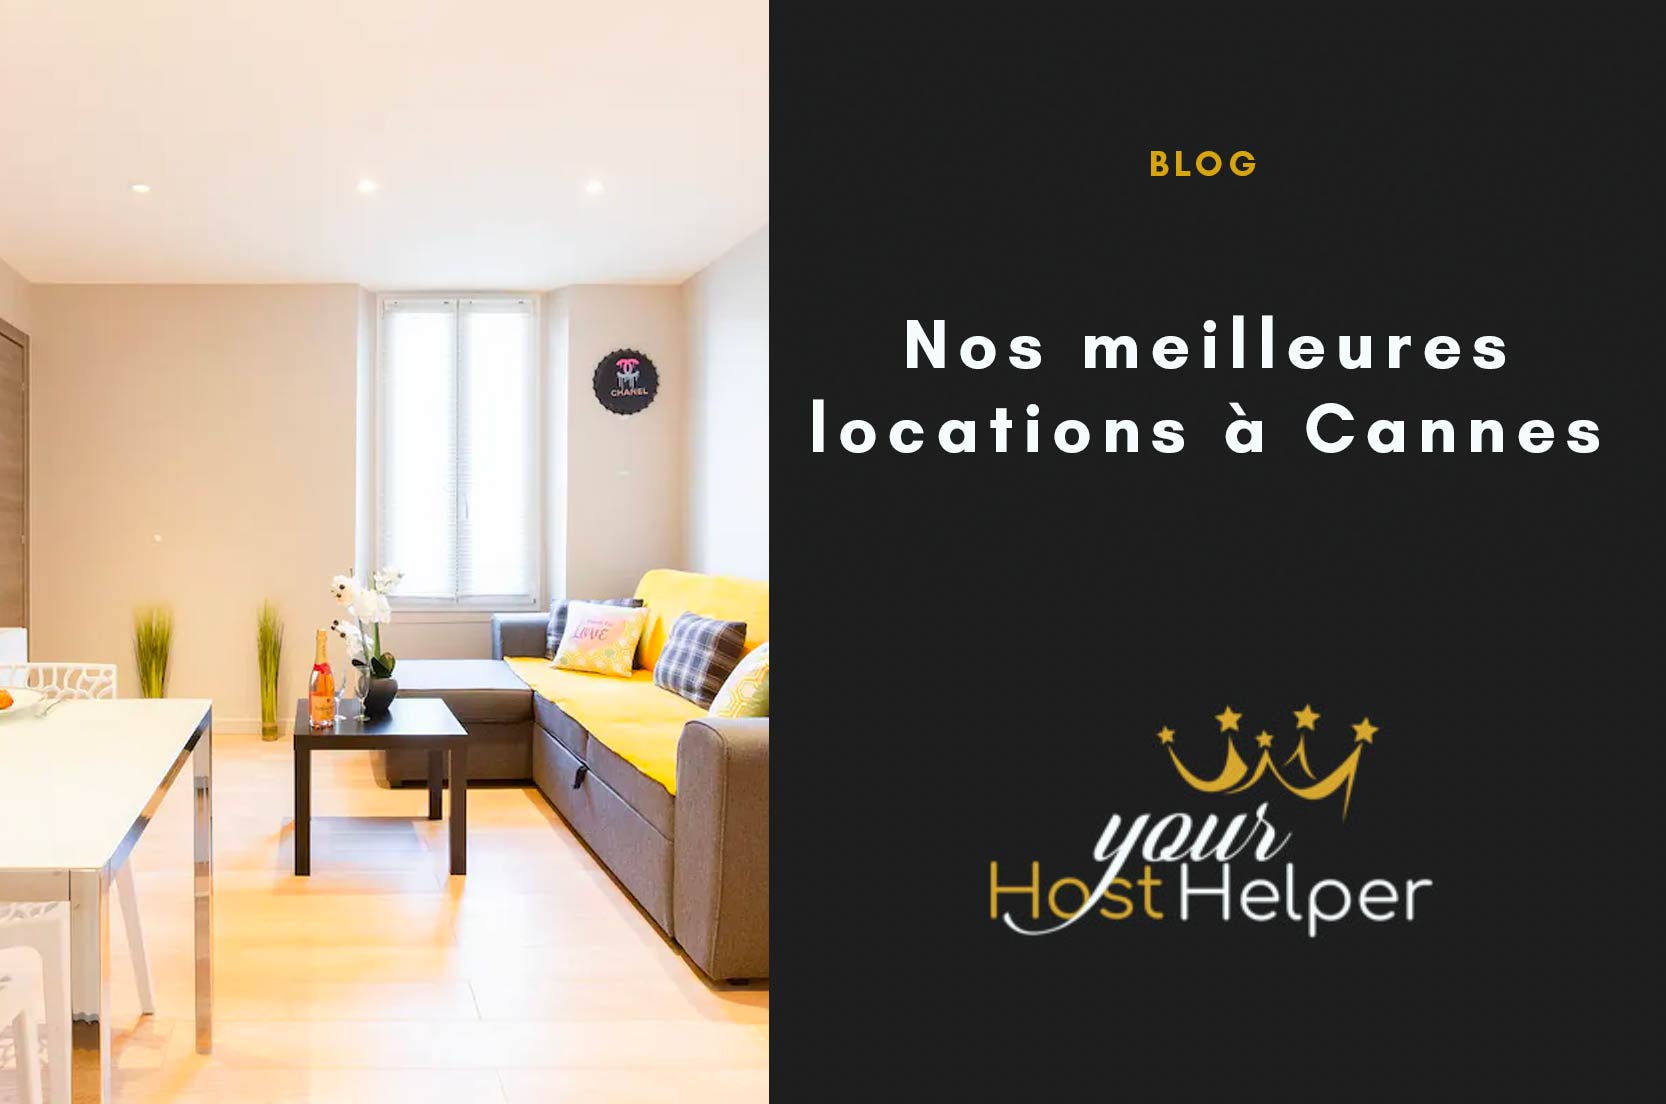 You are currently viewing YourHostHelper vacation rentals in Cannes